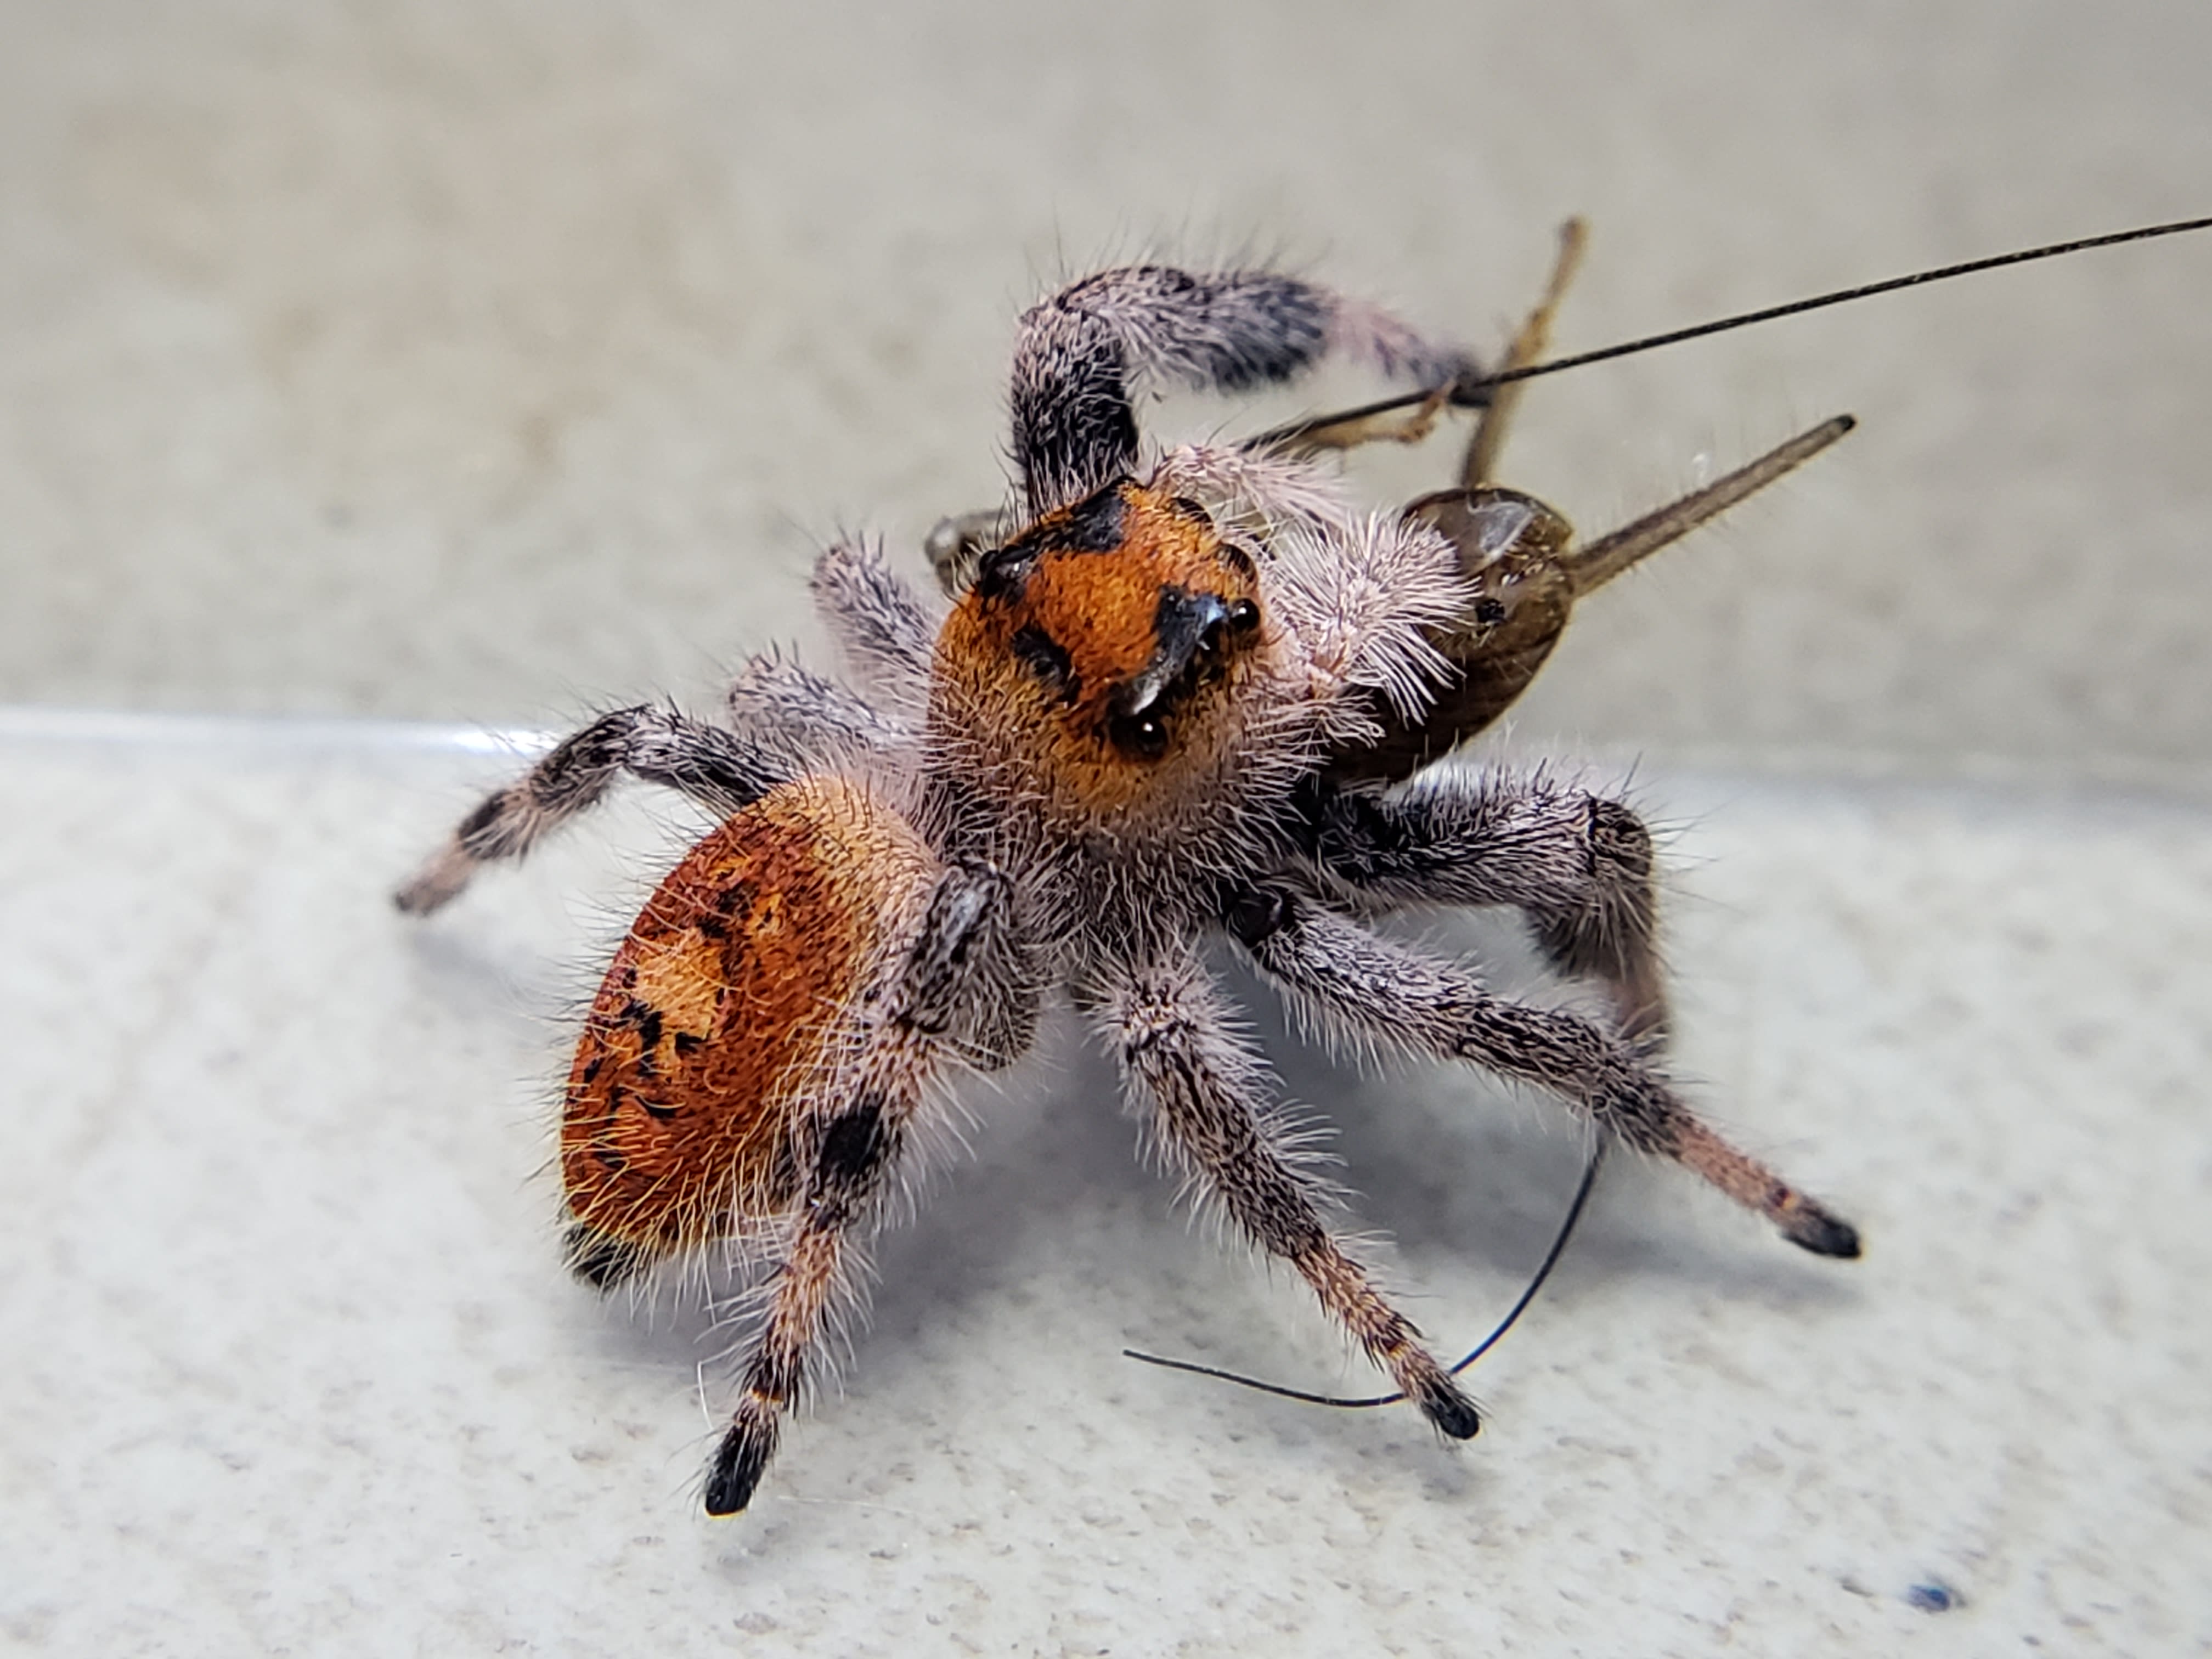 Paradise jumping spider sighted for the first time in Indiana